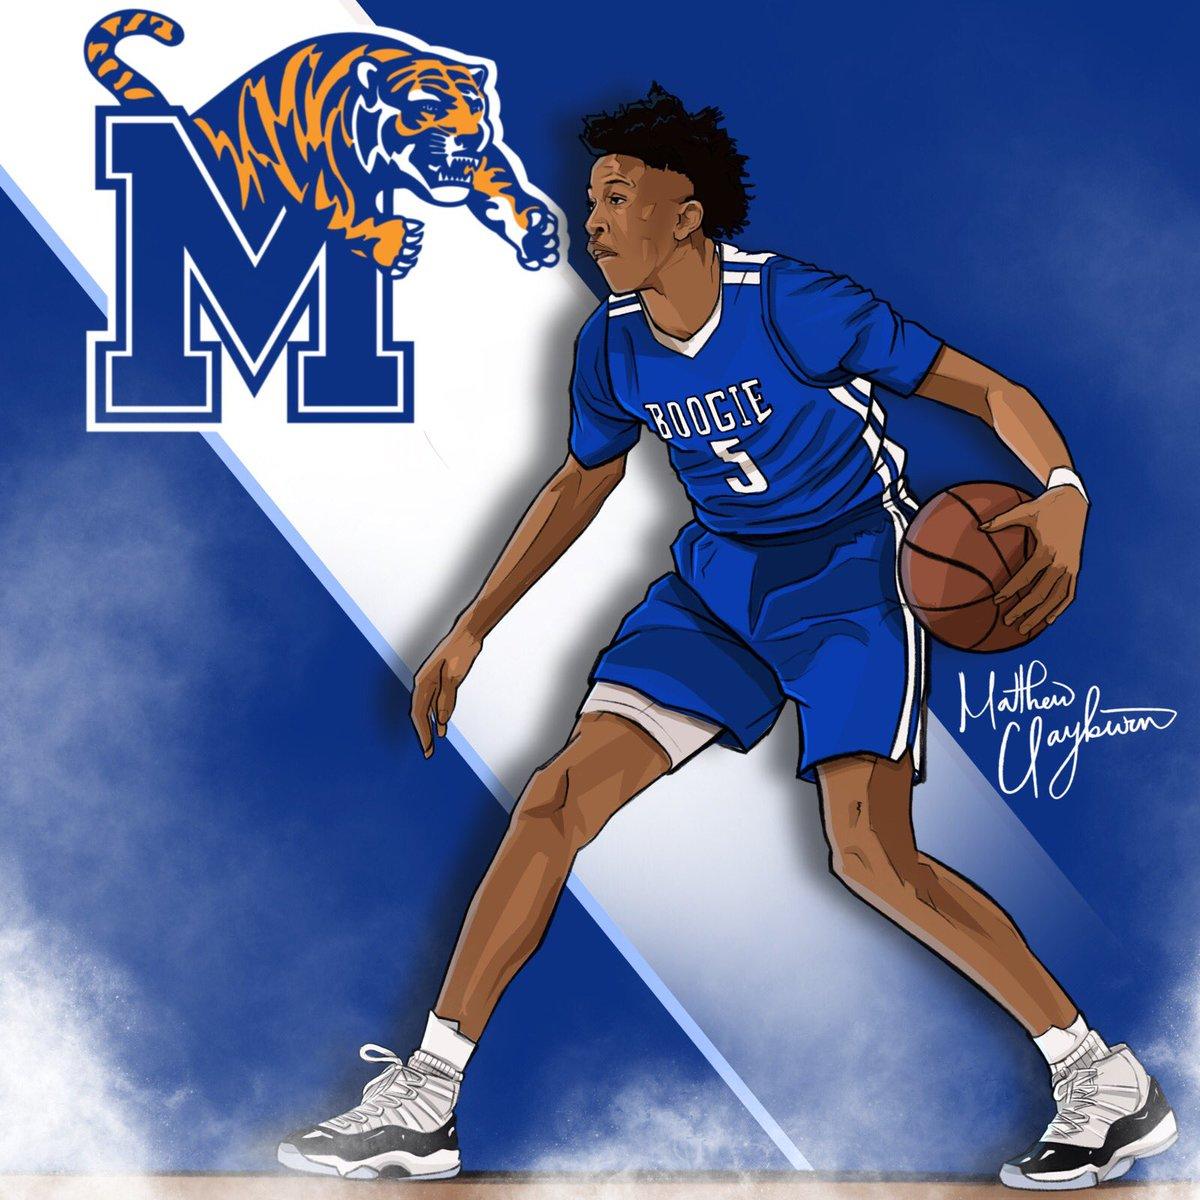 Mikey Williams Wallpaper  iXpap  Ja morant style Nightclub design  Basketball pictures